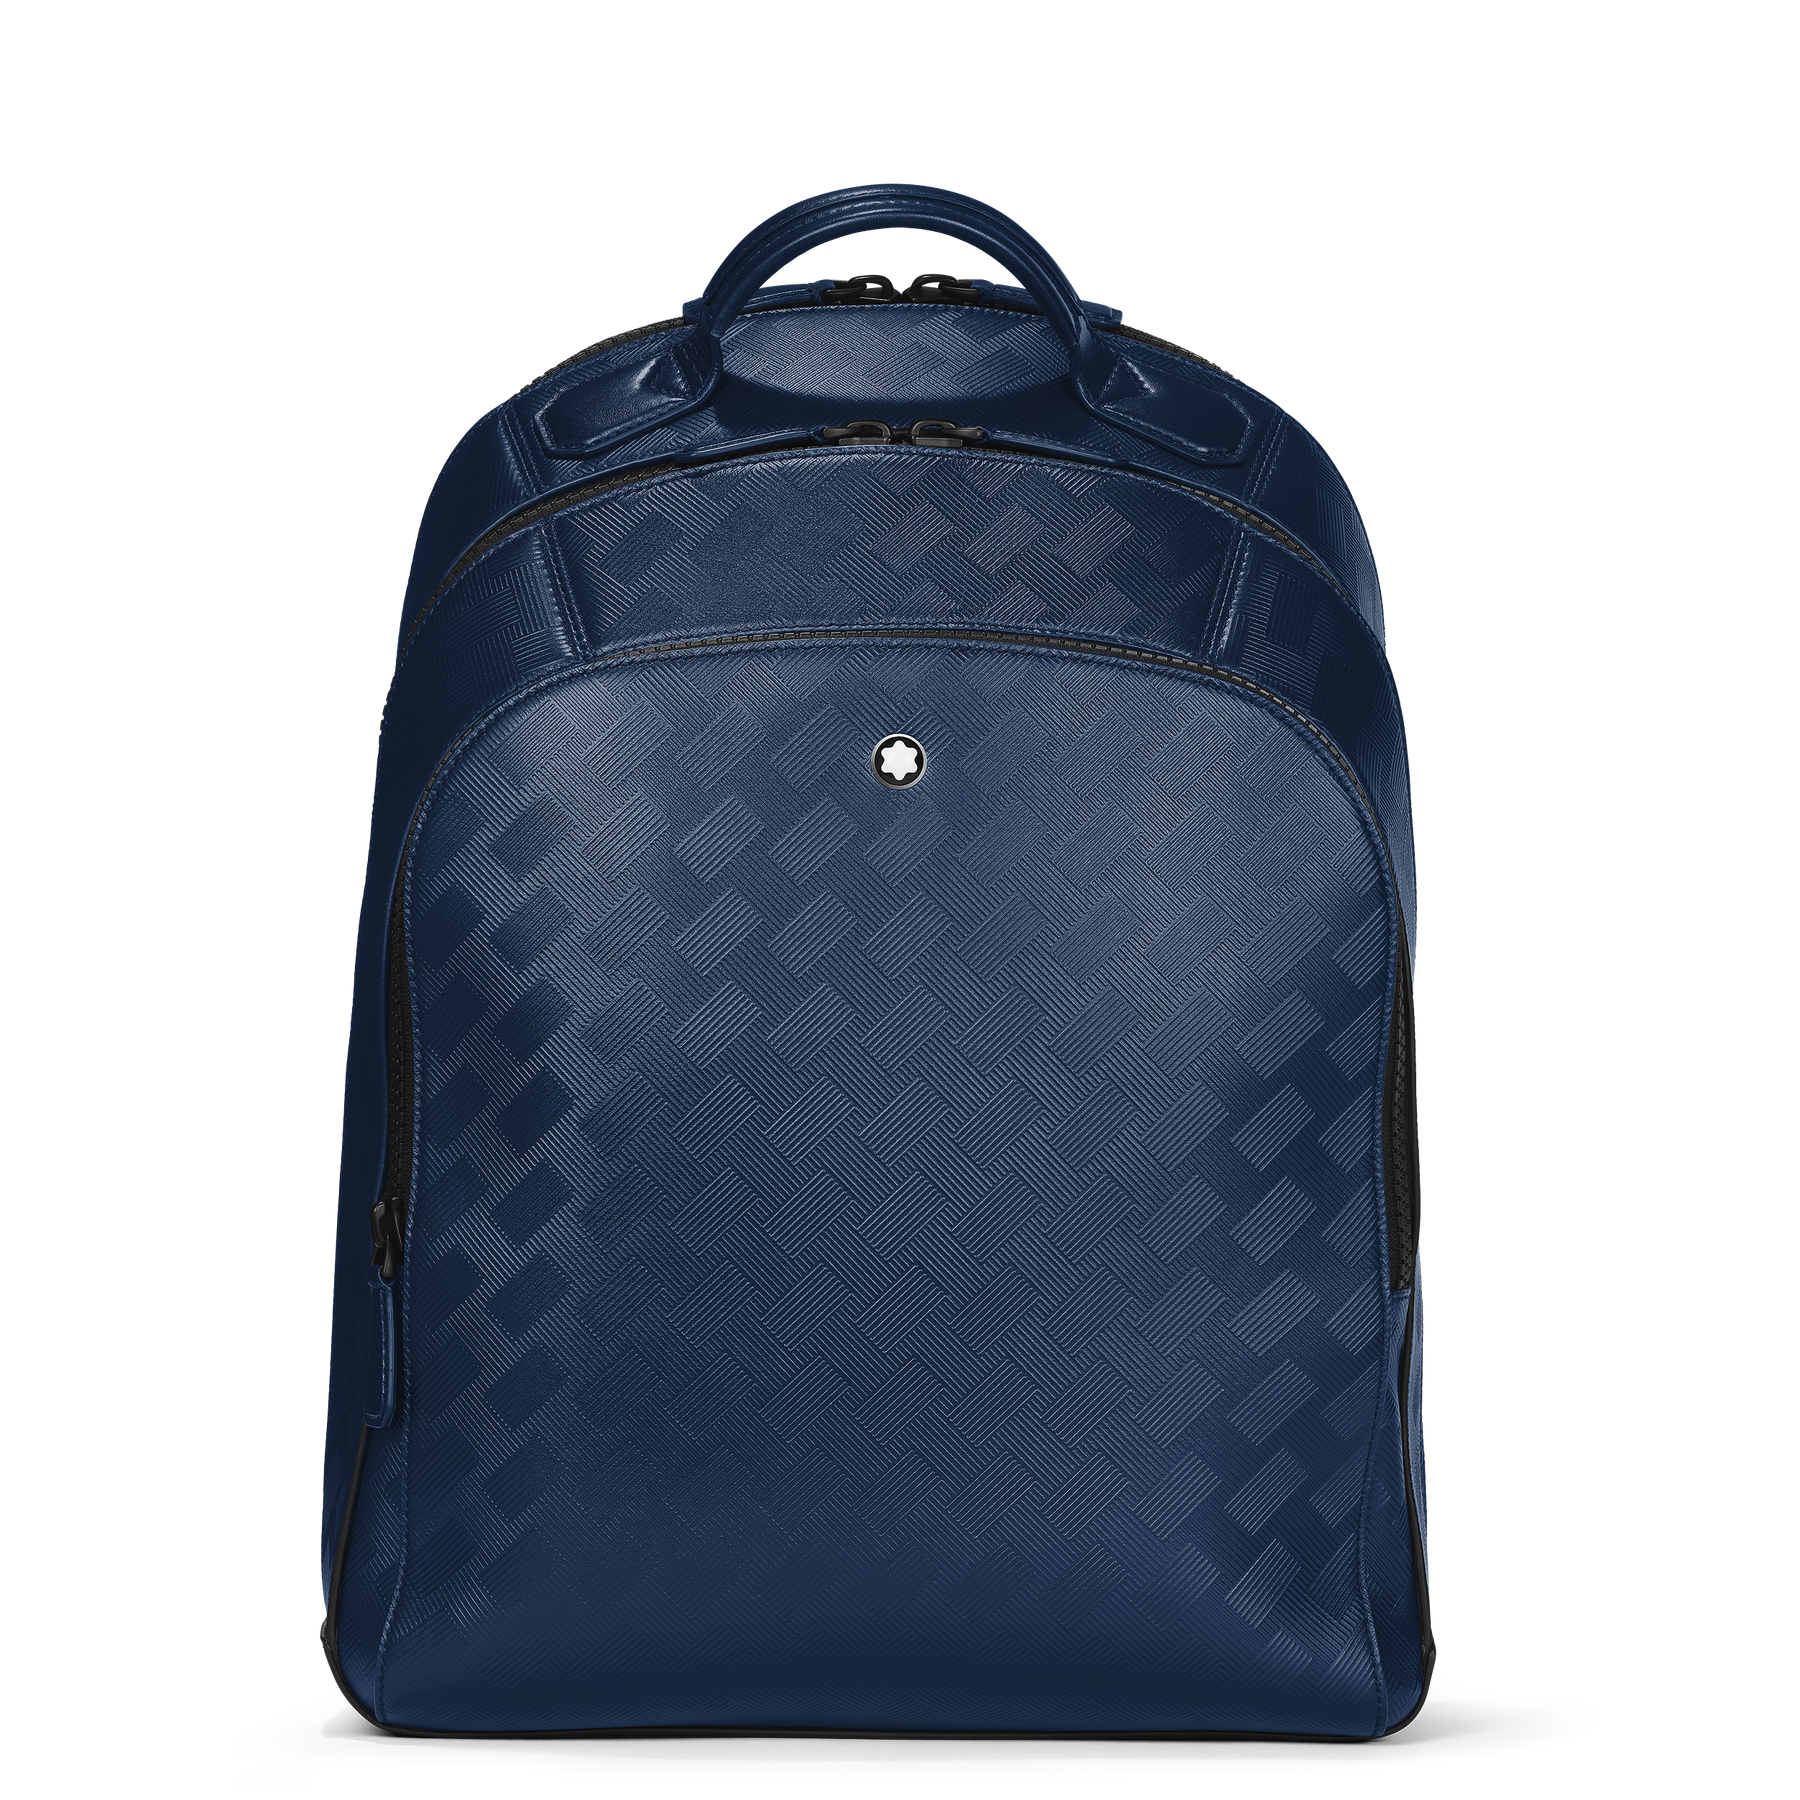 Extreme 3.0 medium backpack 3 compartments